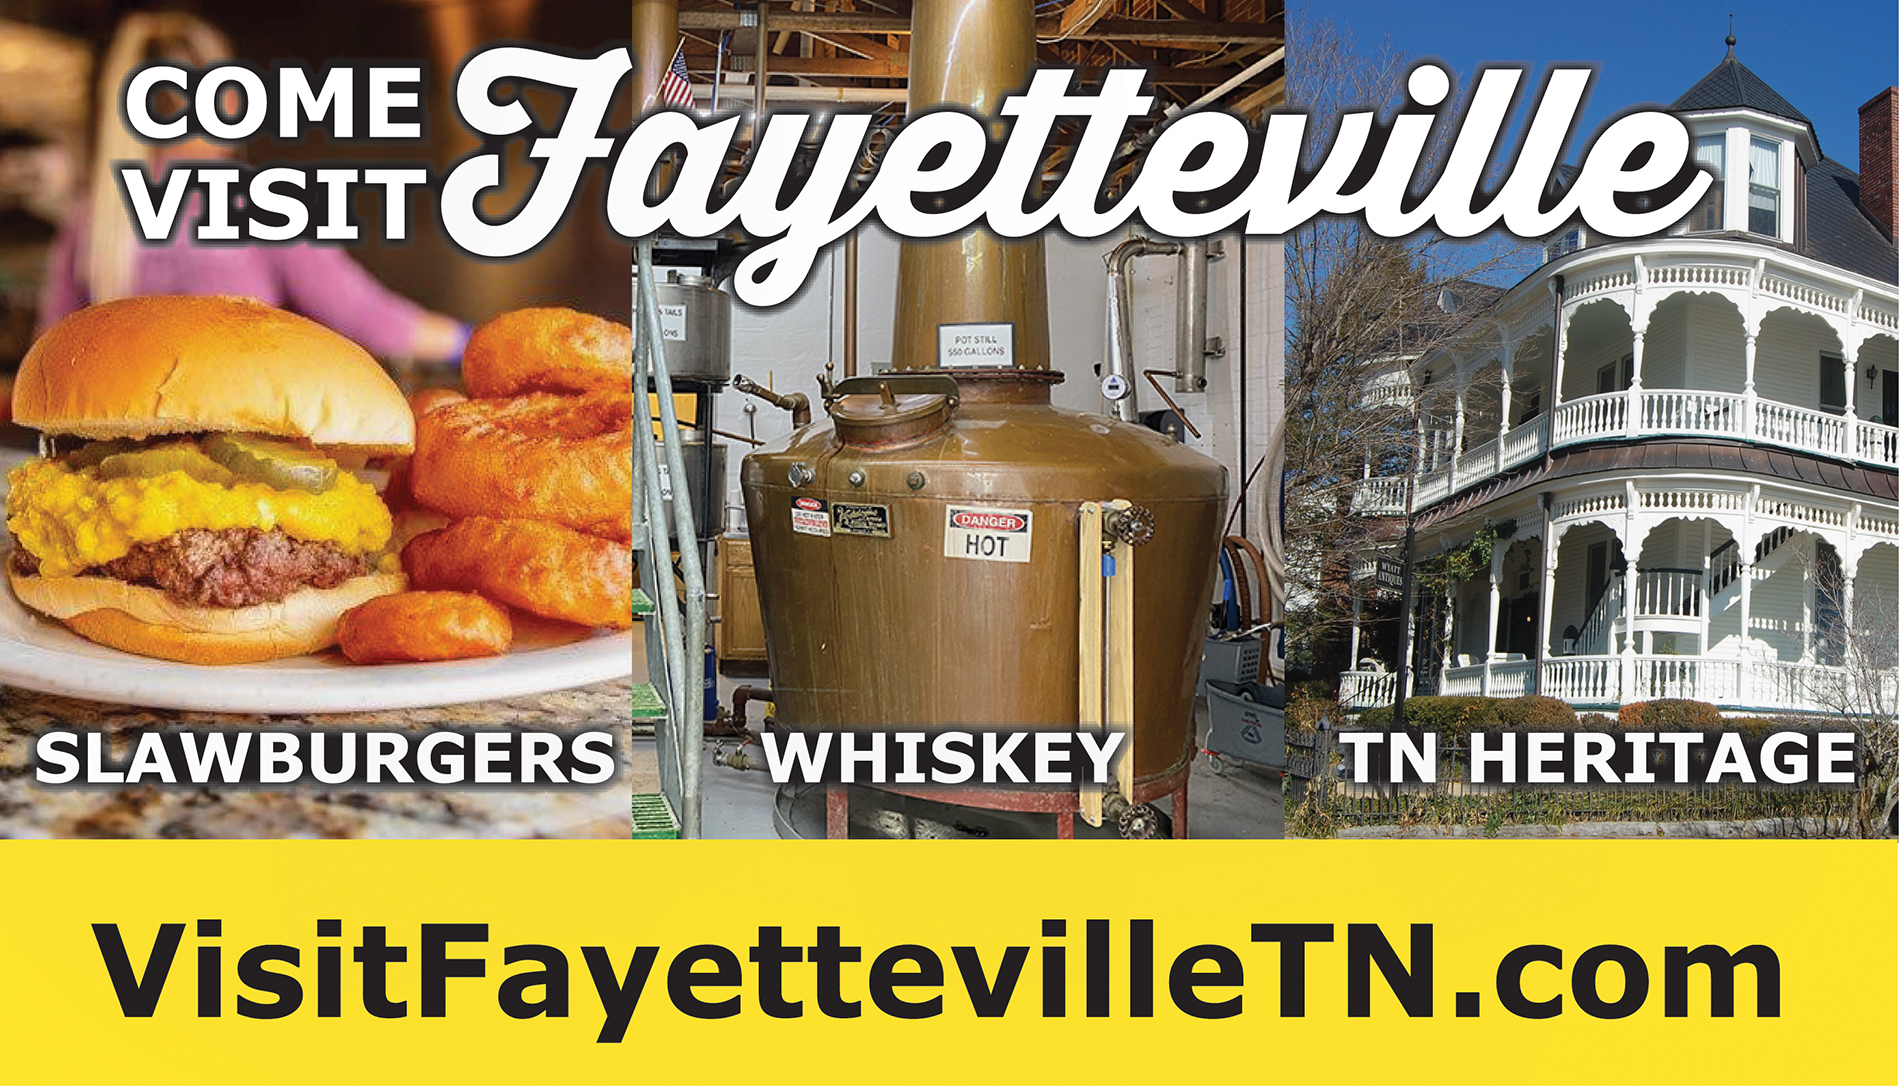 fayetteville chamber ad